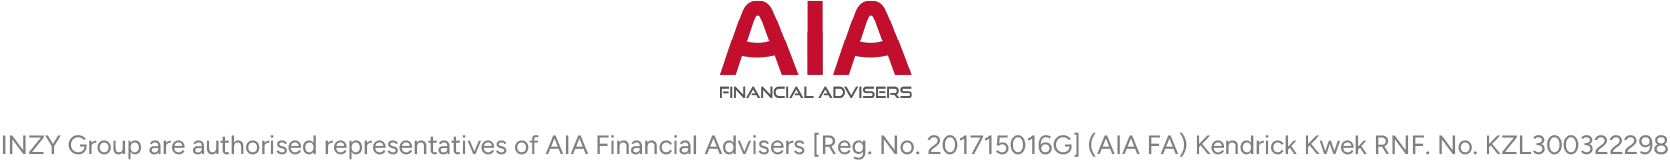 aia-logo_2.png